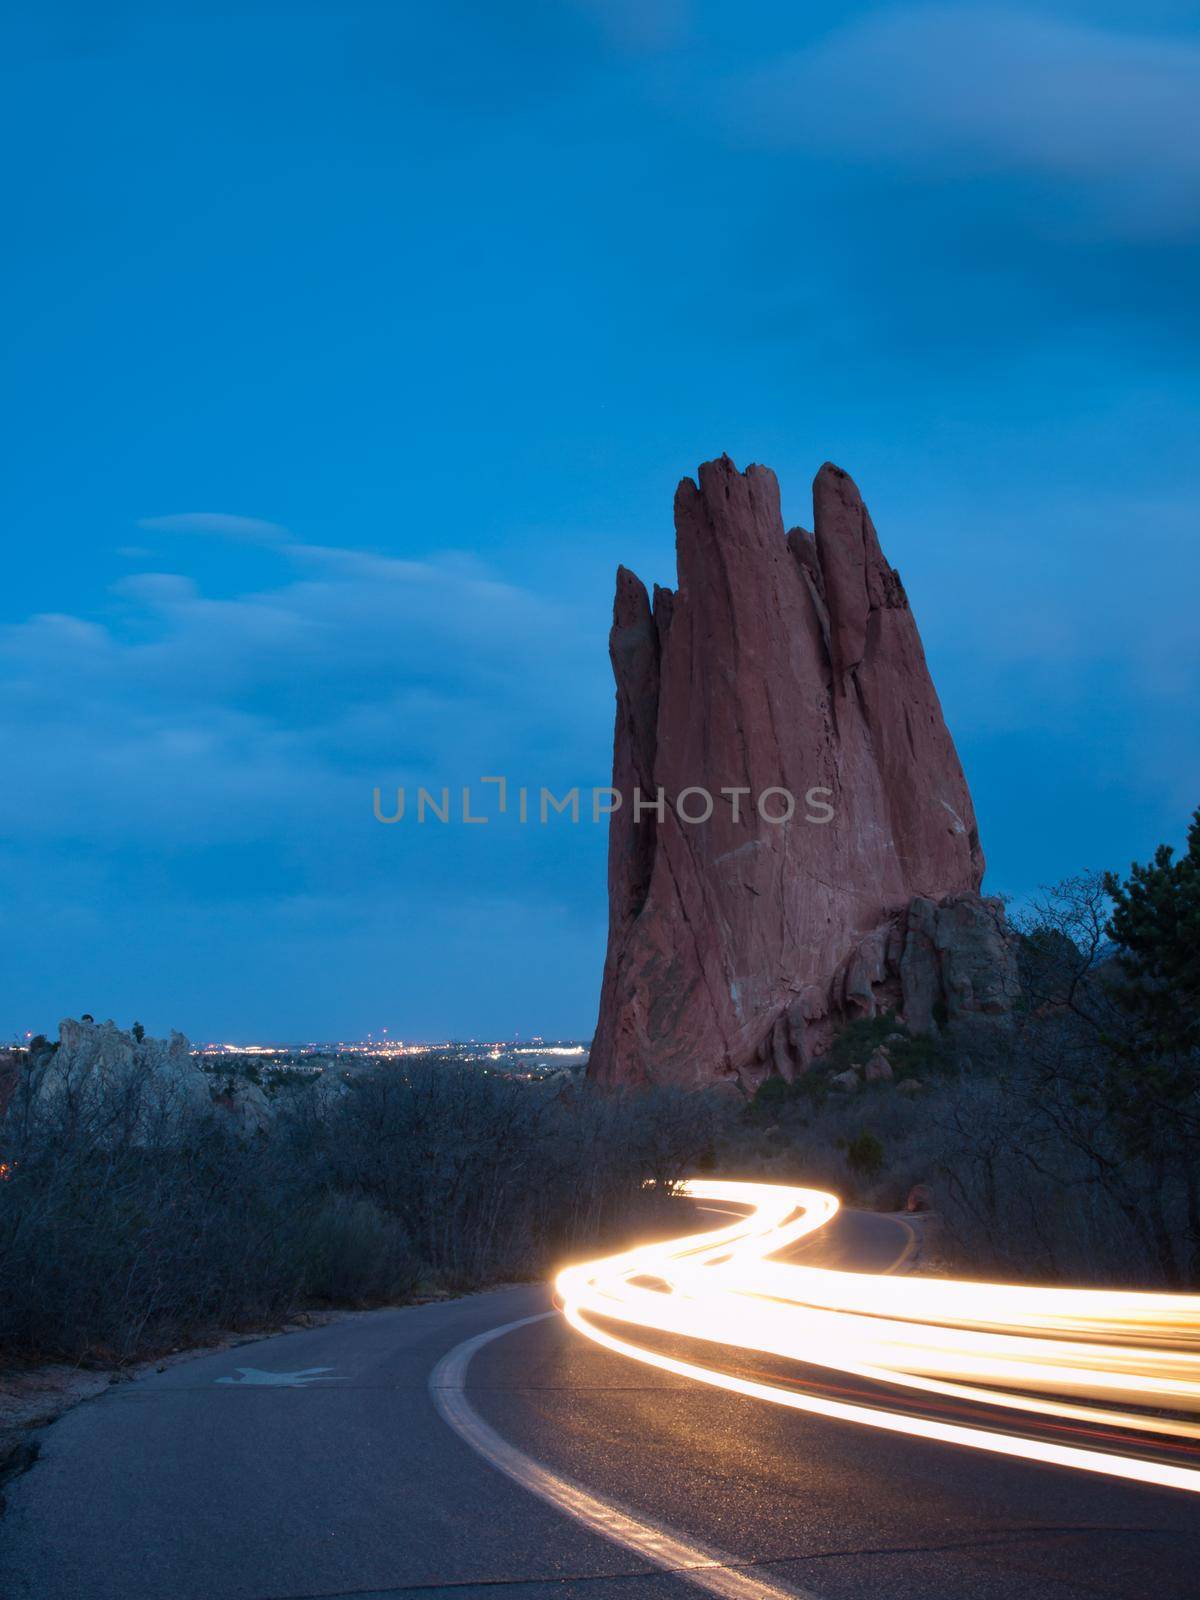 Sunset at Garden of the Gods Rock Formation in Colorado.